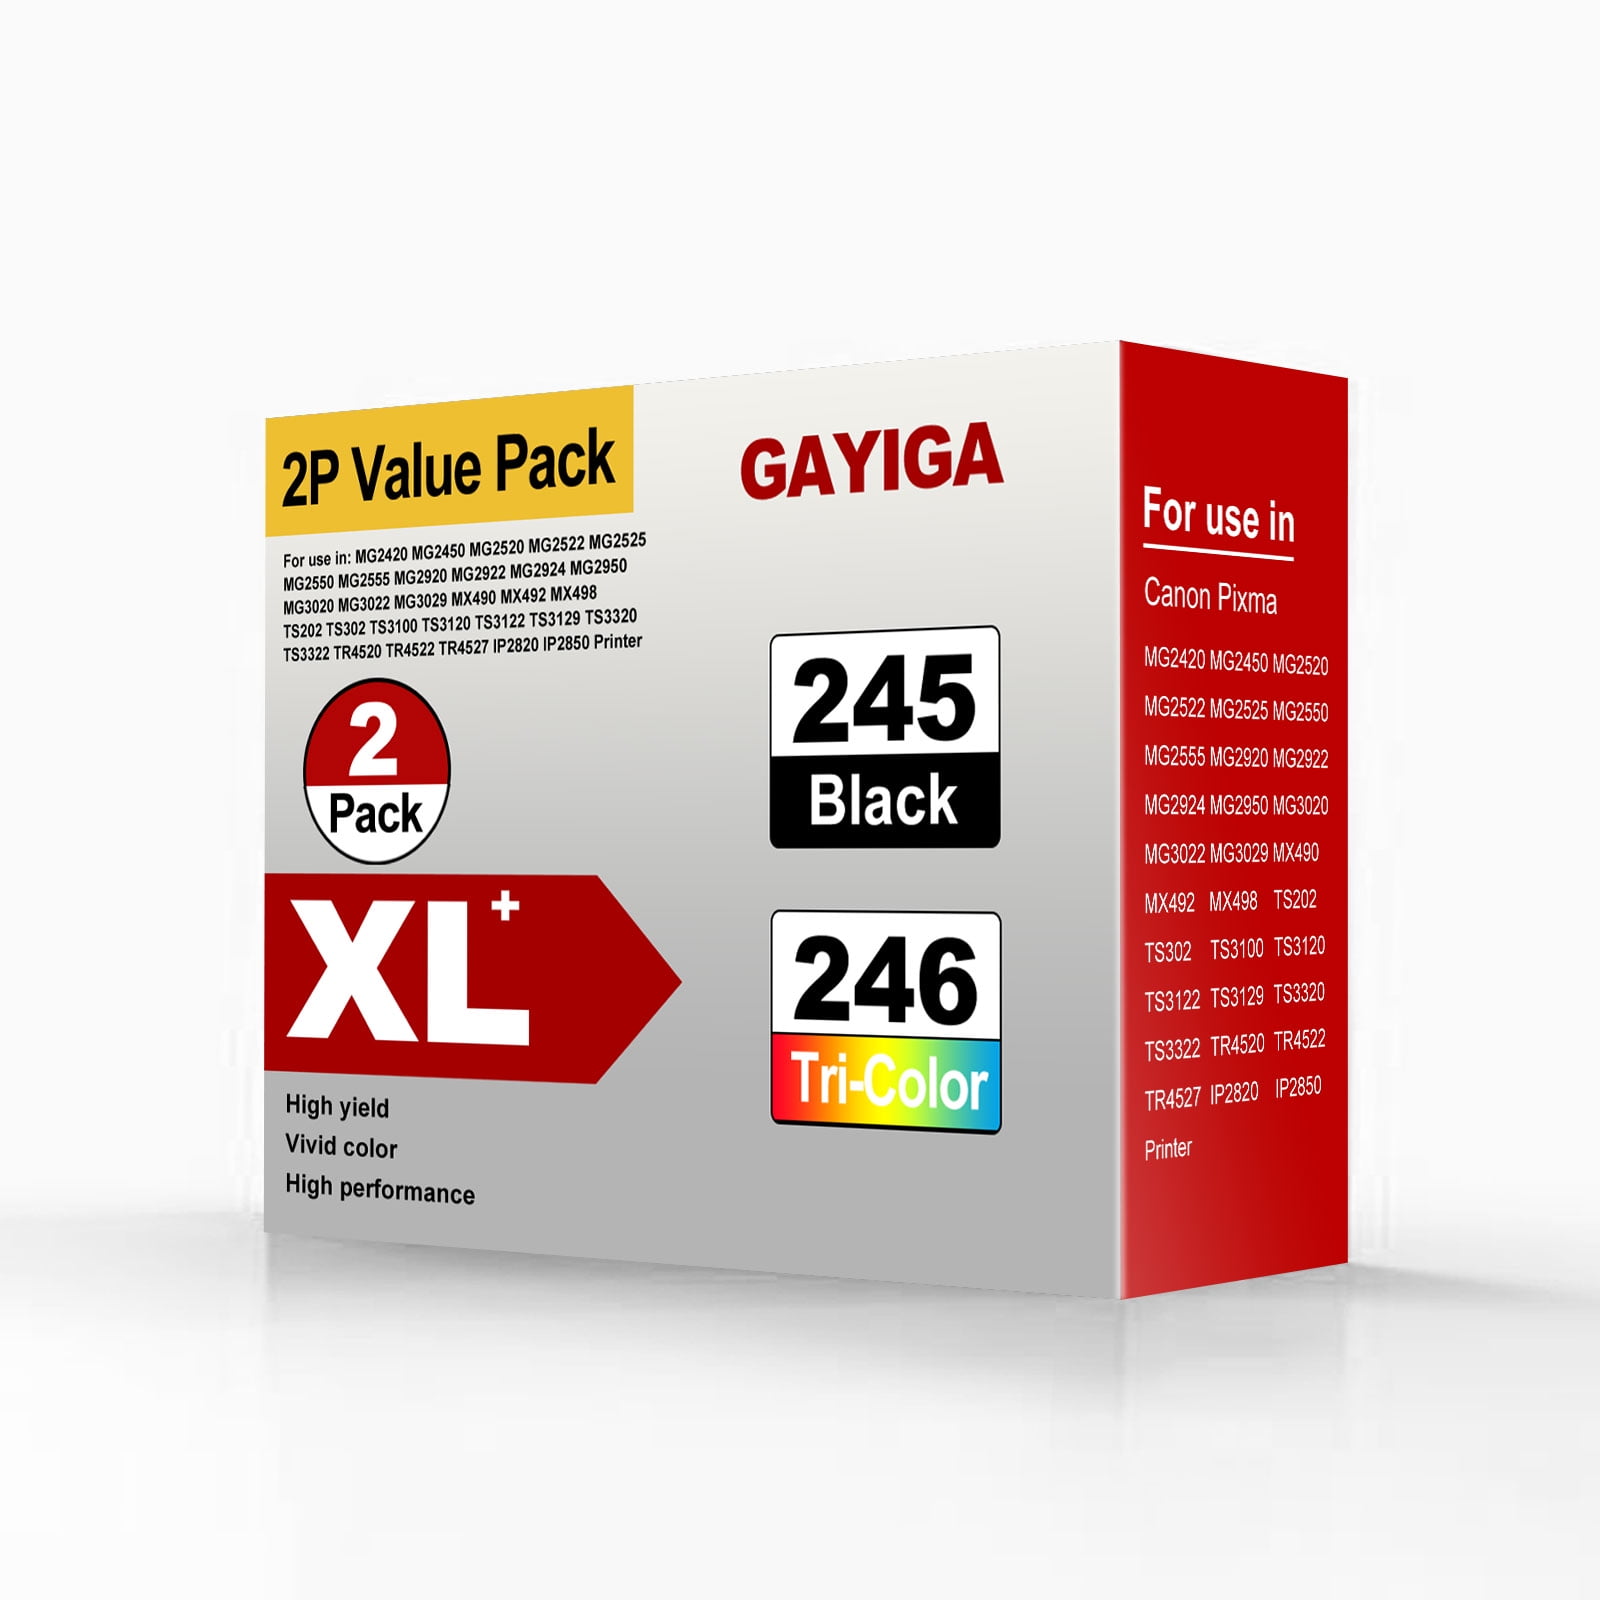 GAYIGA 245 246XL Plus Remanufactured Printer Ink Replacement Canon PG-245 XL CL-246 XL Fit for Cannon MX490 MX492 TS3100 TS3122 TS3300 TS3322 TS3320 TR4500 TR4520 - Walmart.com